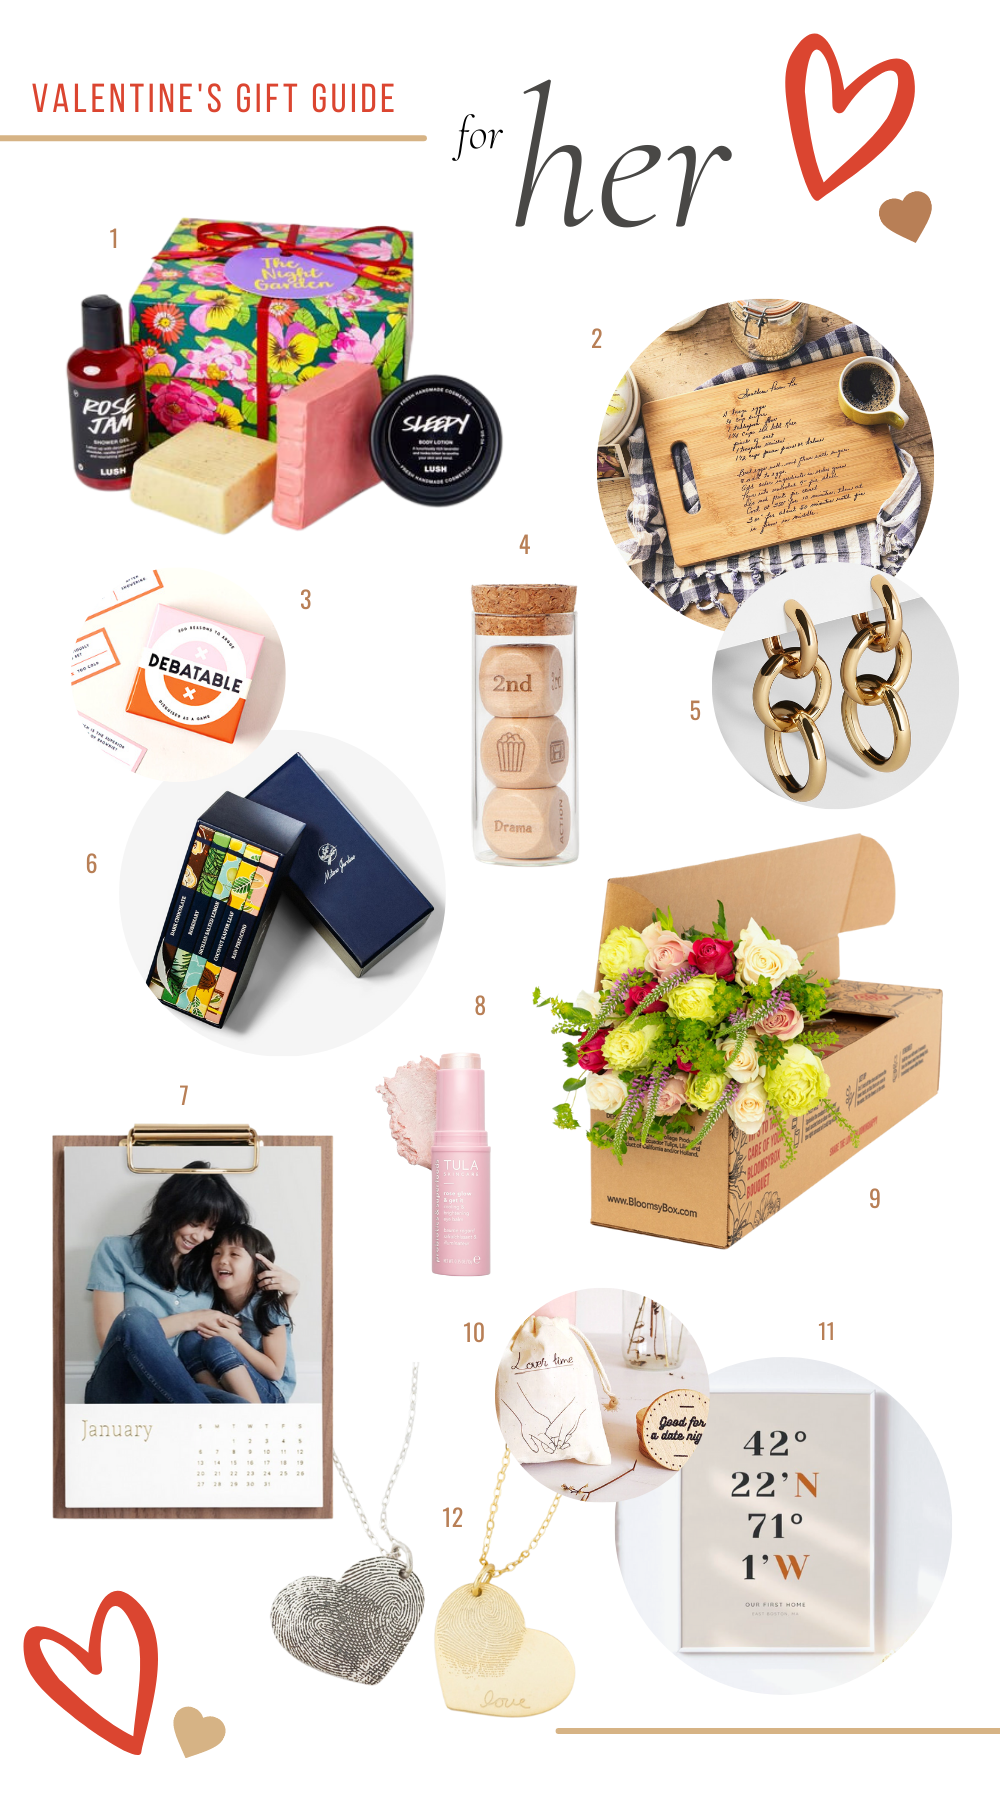 637 His  Hers Gifts Gift Ideas for Couples  Uncommon Goods